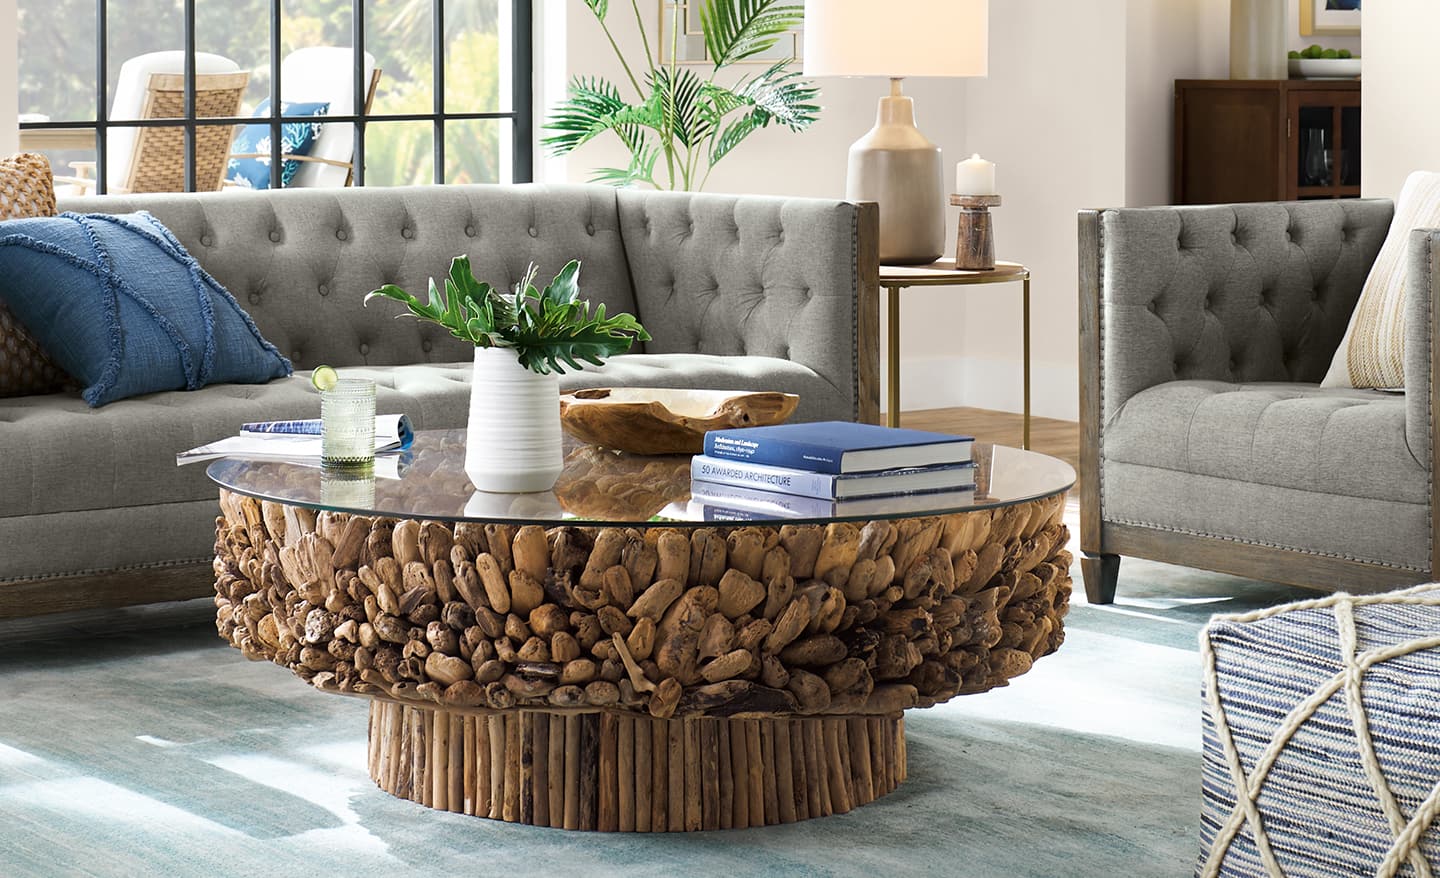 Coffee table with a vase and objects in a living room